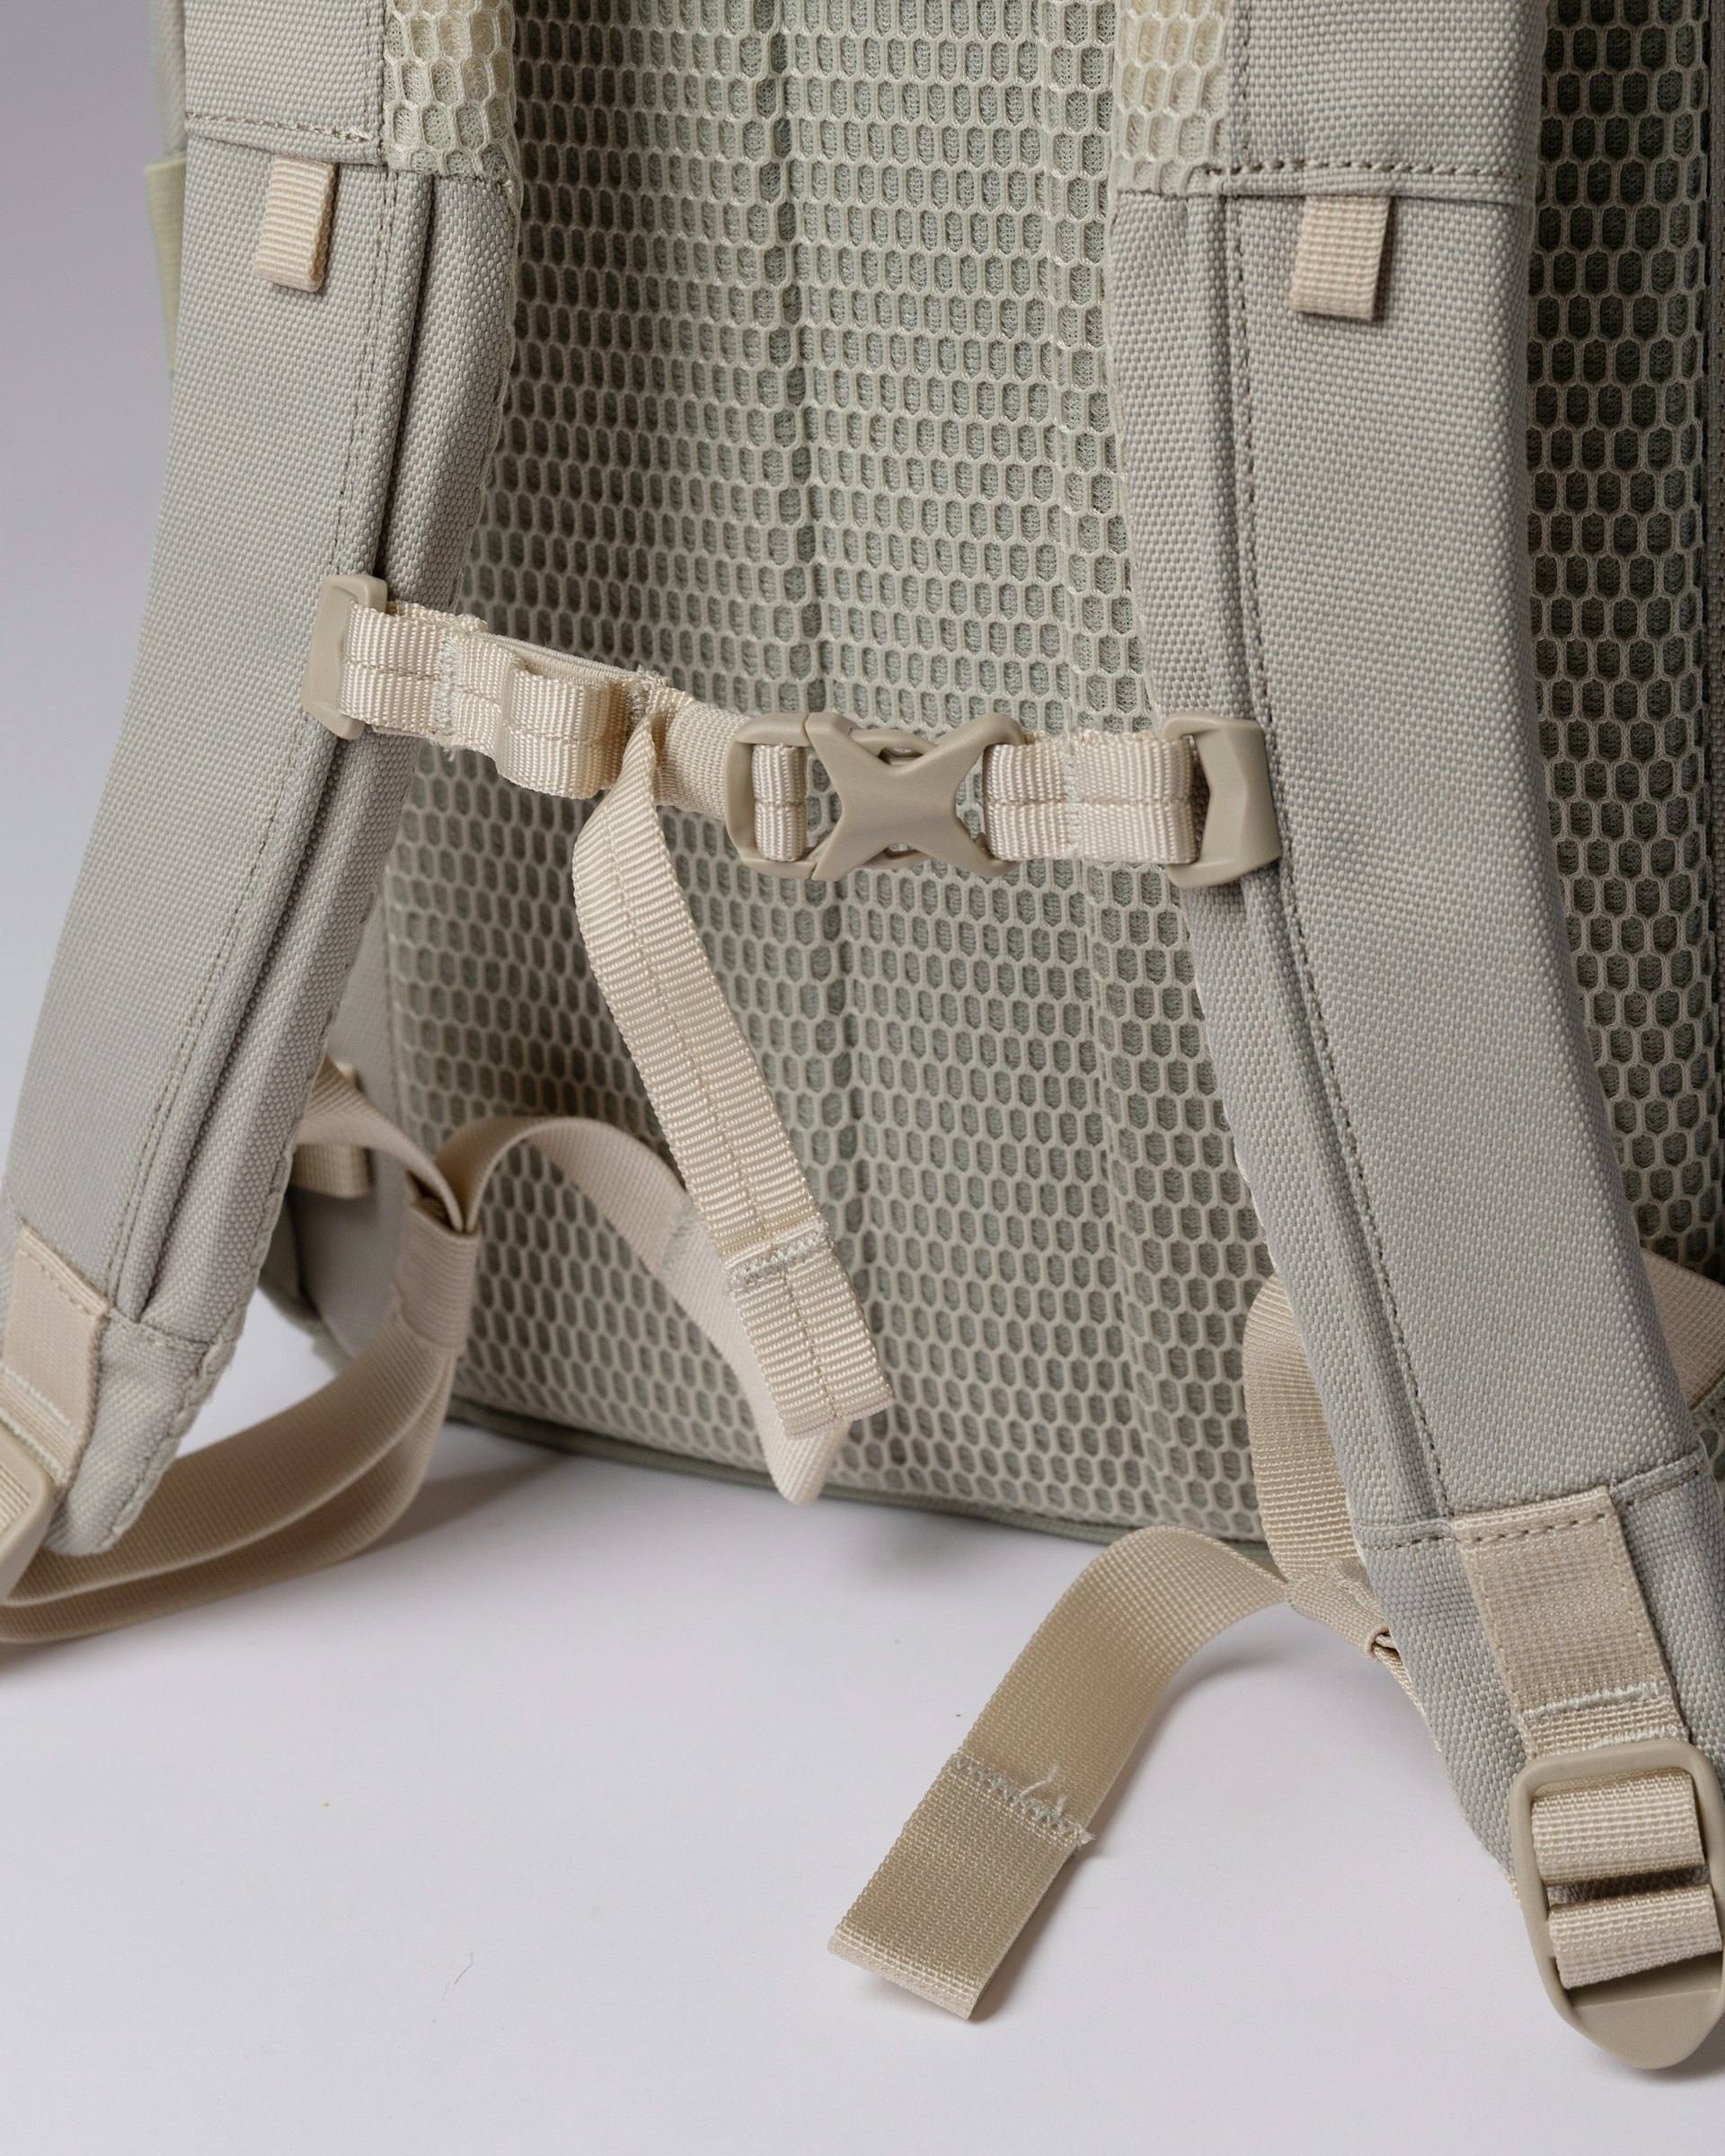 Walter belongs to the category Backpacks and is in color pale birch light & pale birch dark (7 of 9)